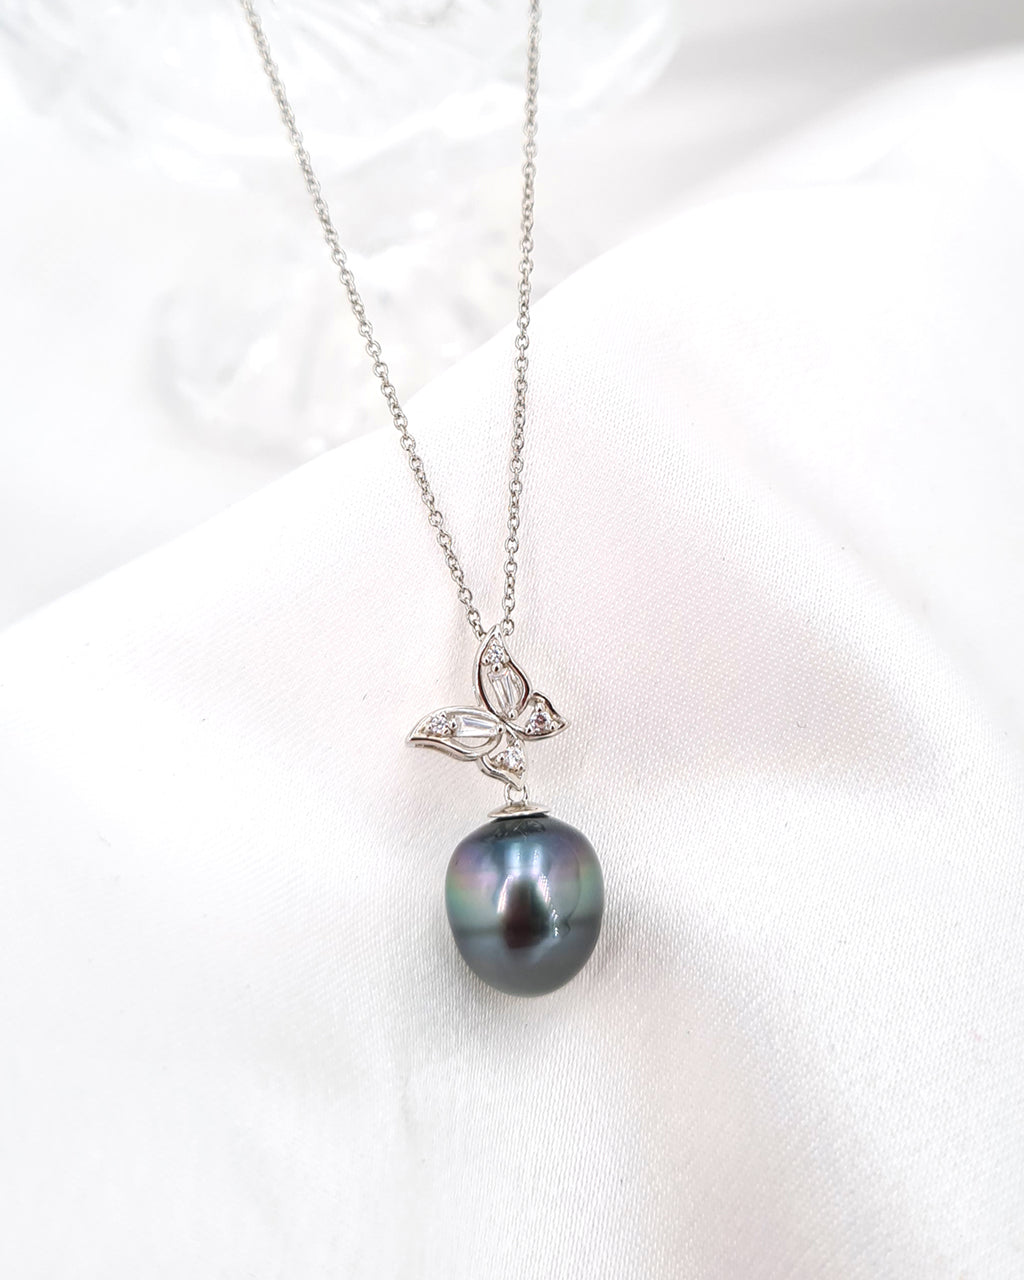 Tahitian Pearl Pendant Necklace - 18K White Gold Vermeil Jewelry - Glitz  And Love